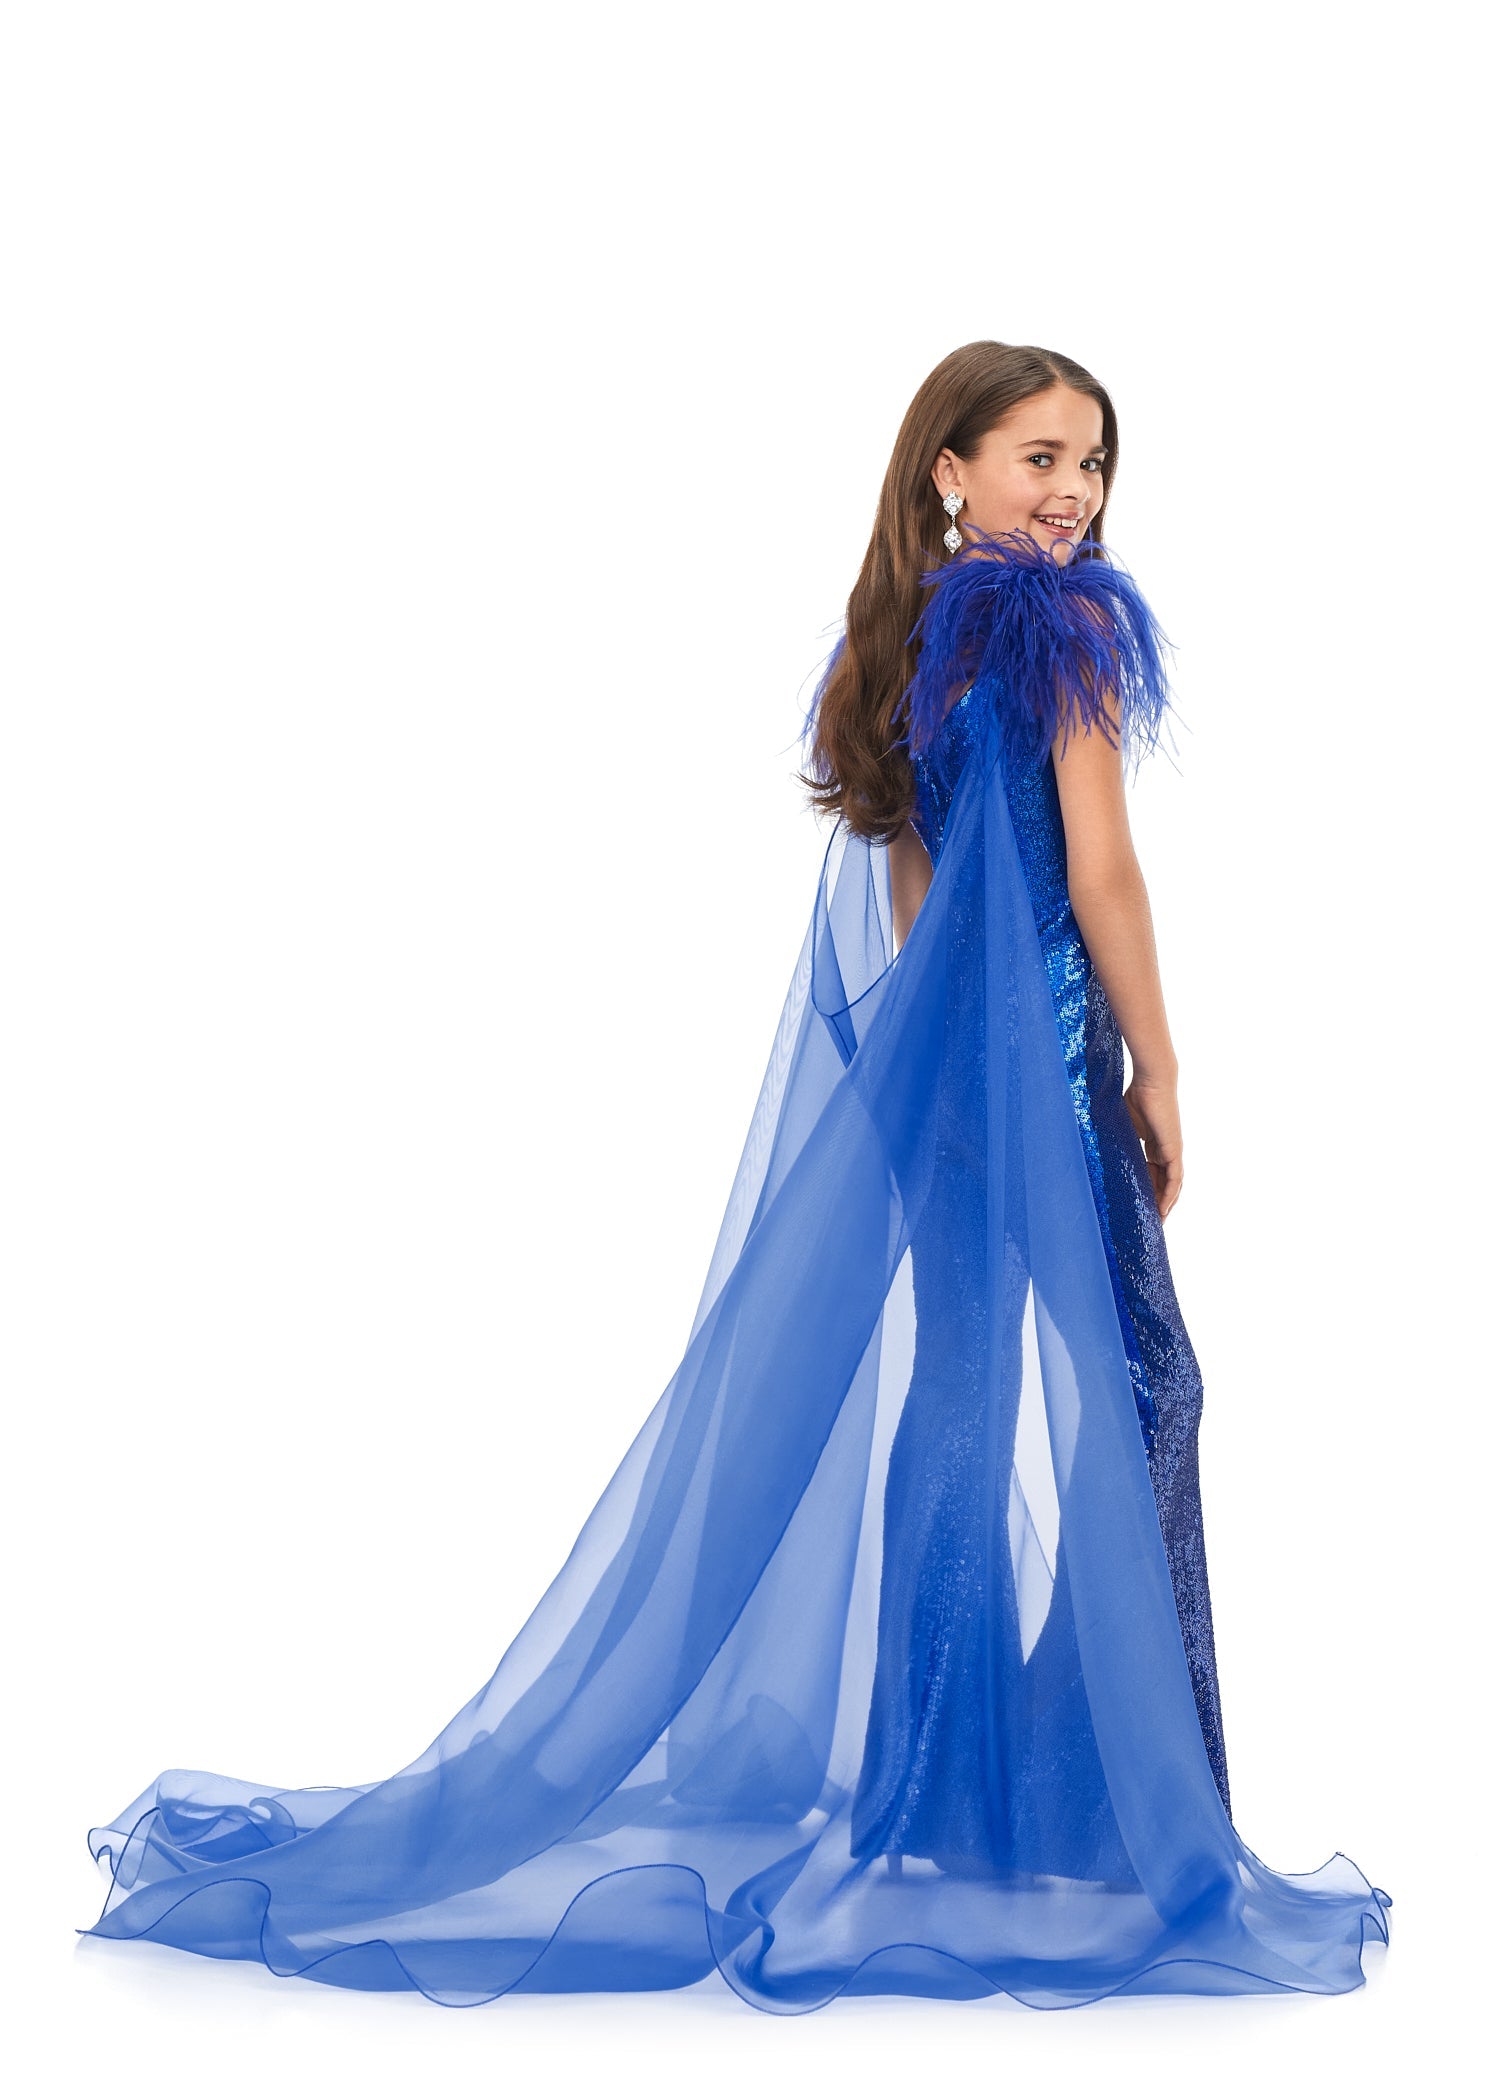 Ashley Lauren Kids 8174 Girls Sequin Jumpsuit with Organza Cape  Bring the drama in this kids sequin jumpsuit featuring a v-neckline. The look is complelted with an off the shoulder feather strap and organza cape.